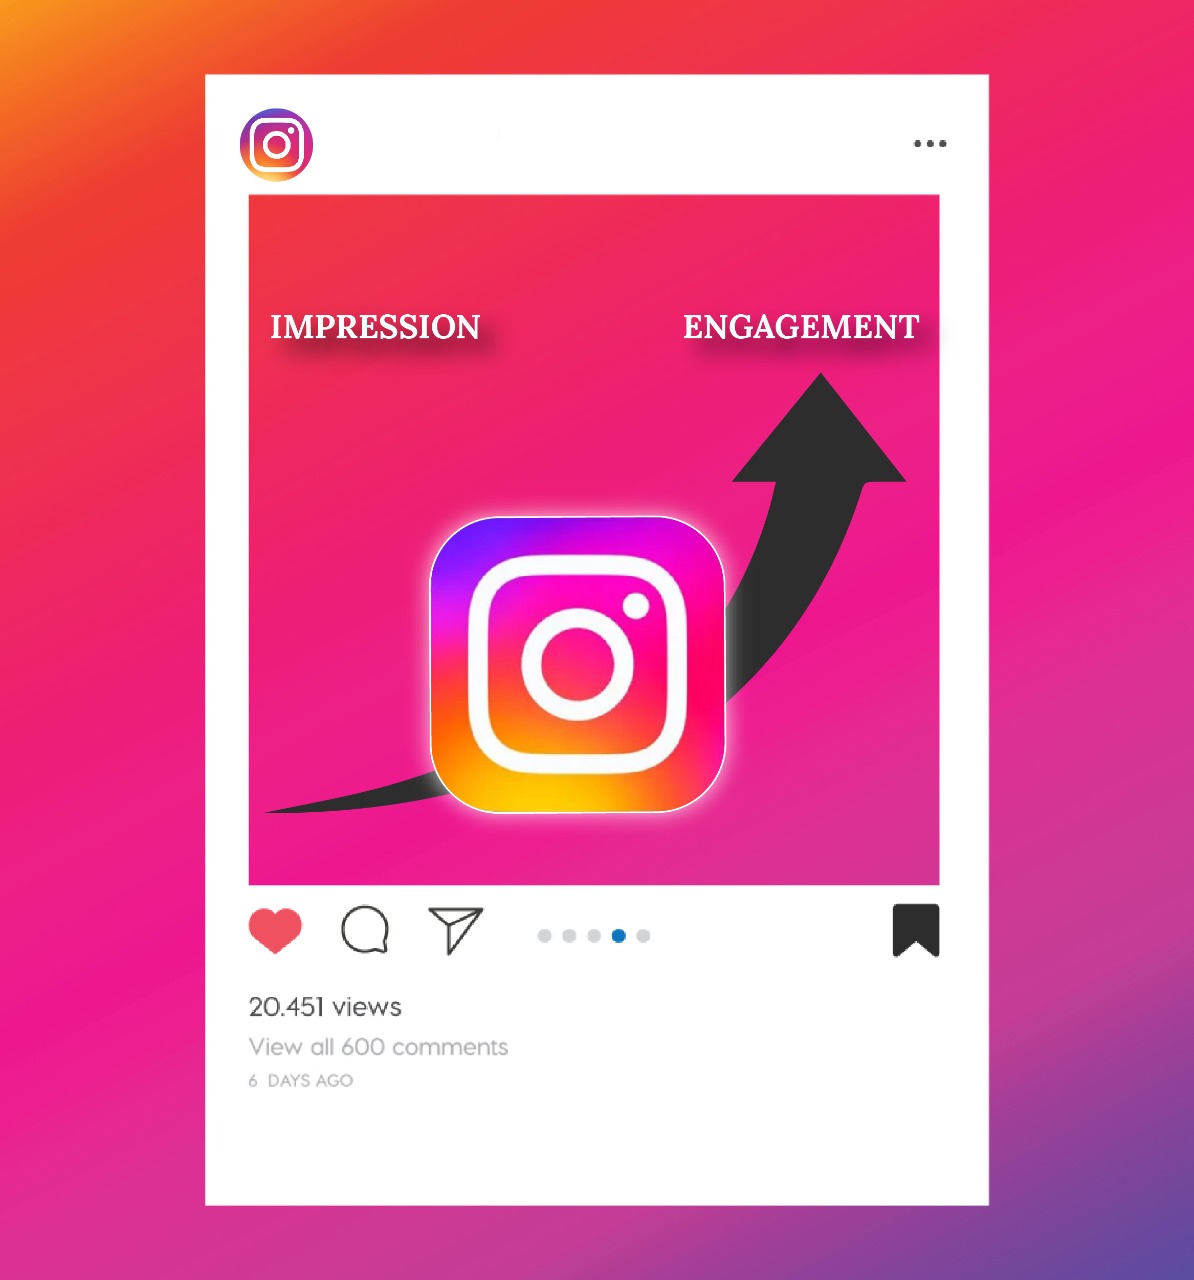 What Does Impressions and Engagement Mean on Instagram